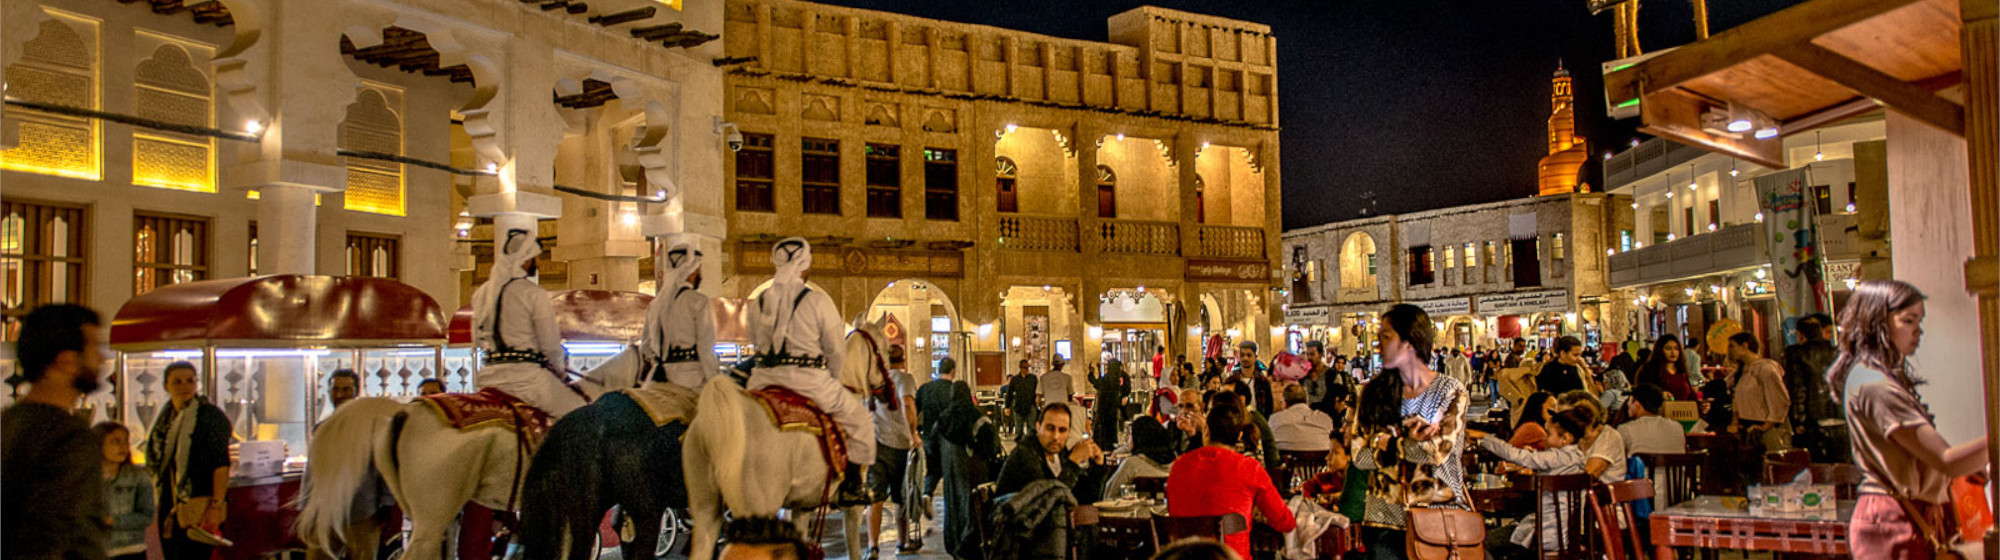 Nightlife at the Souq Waqif in Doha